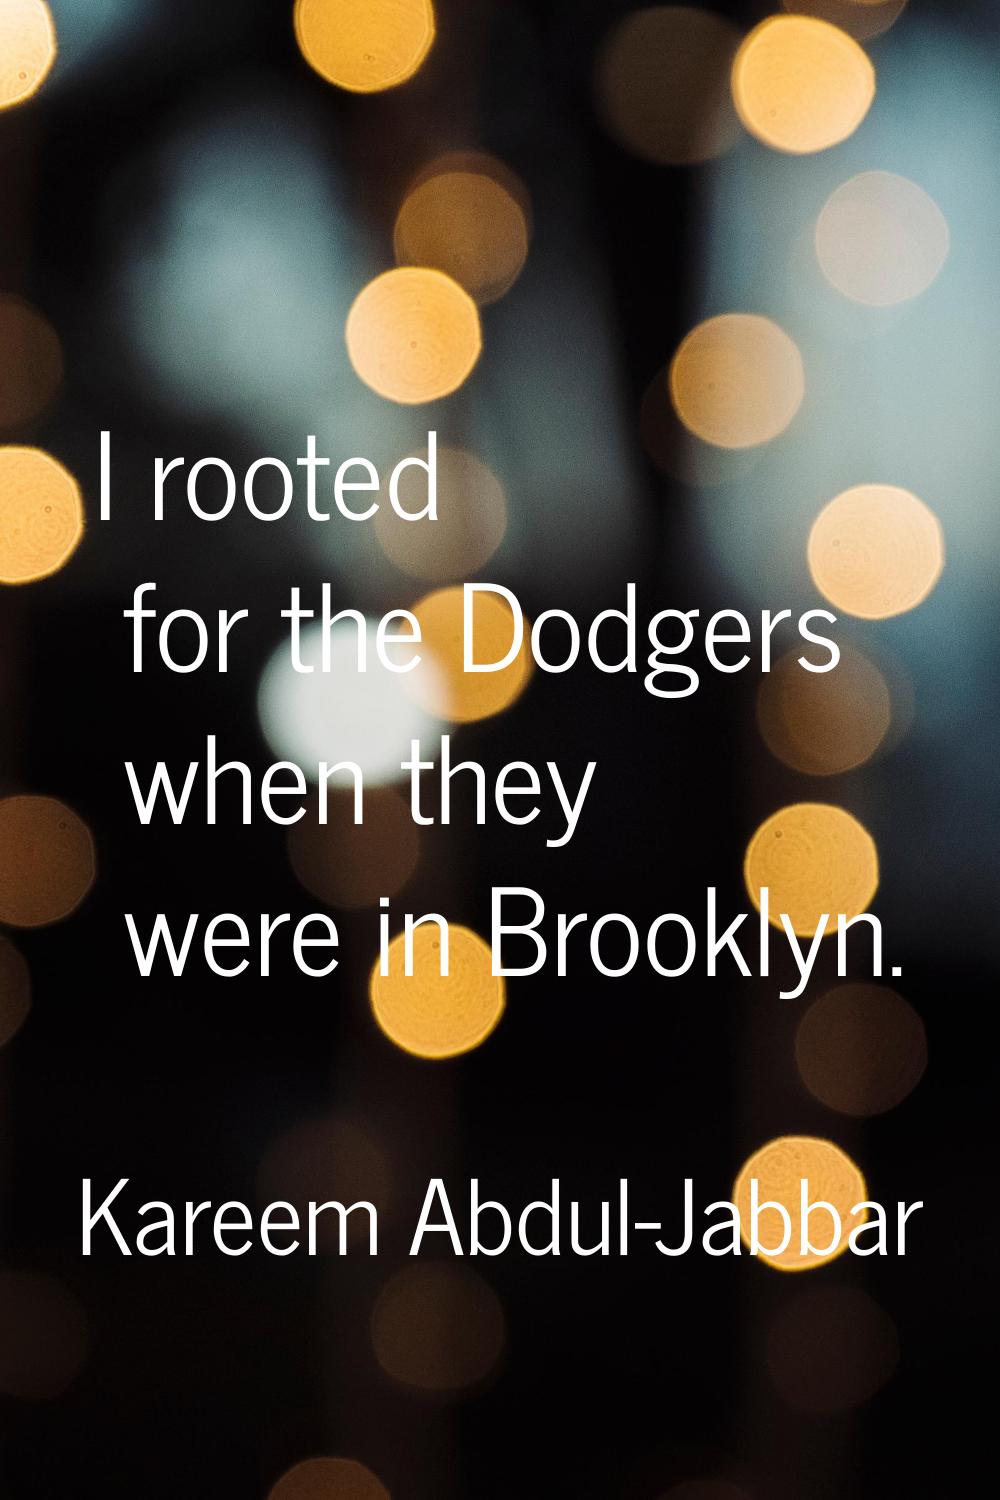 I rooted for the Dodgers when they were in Brooklyn.